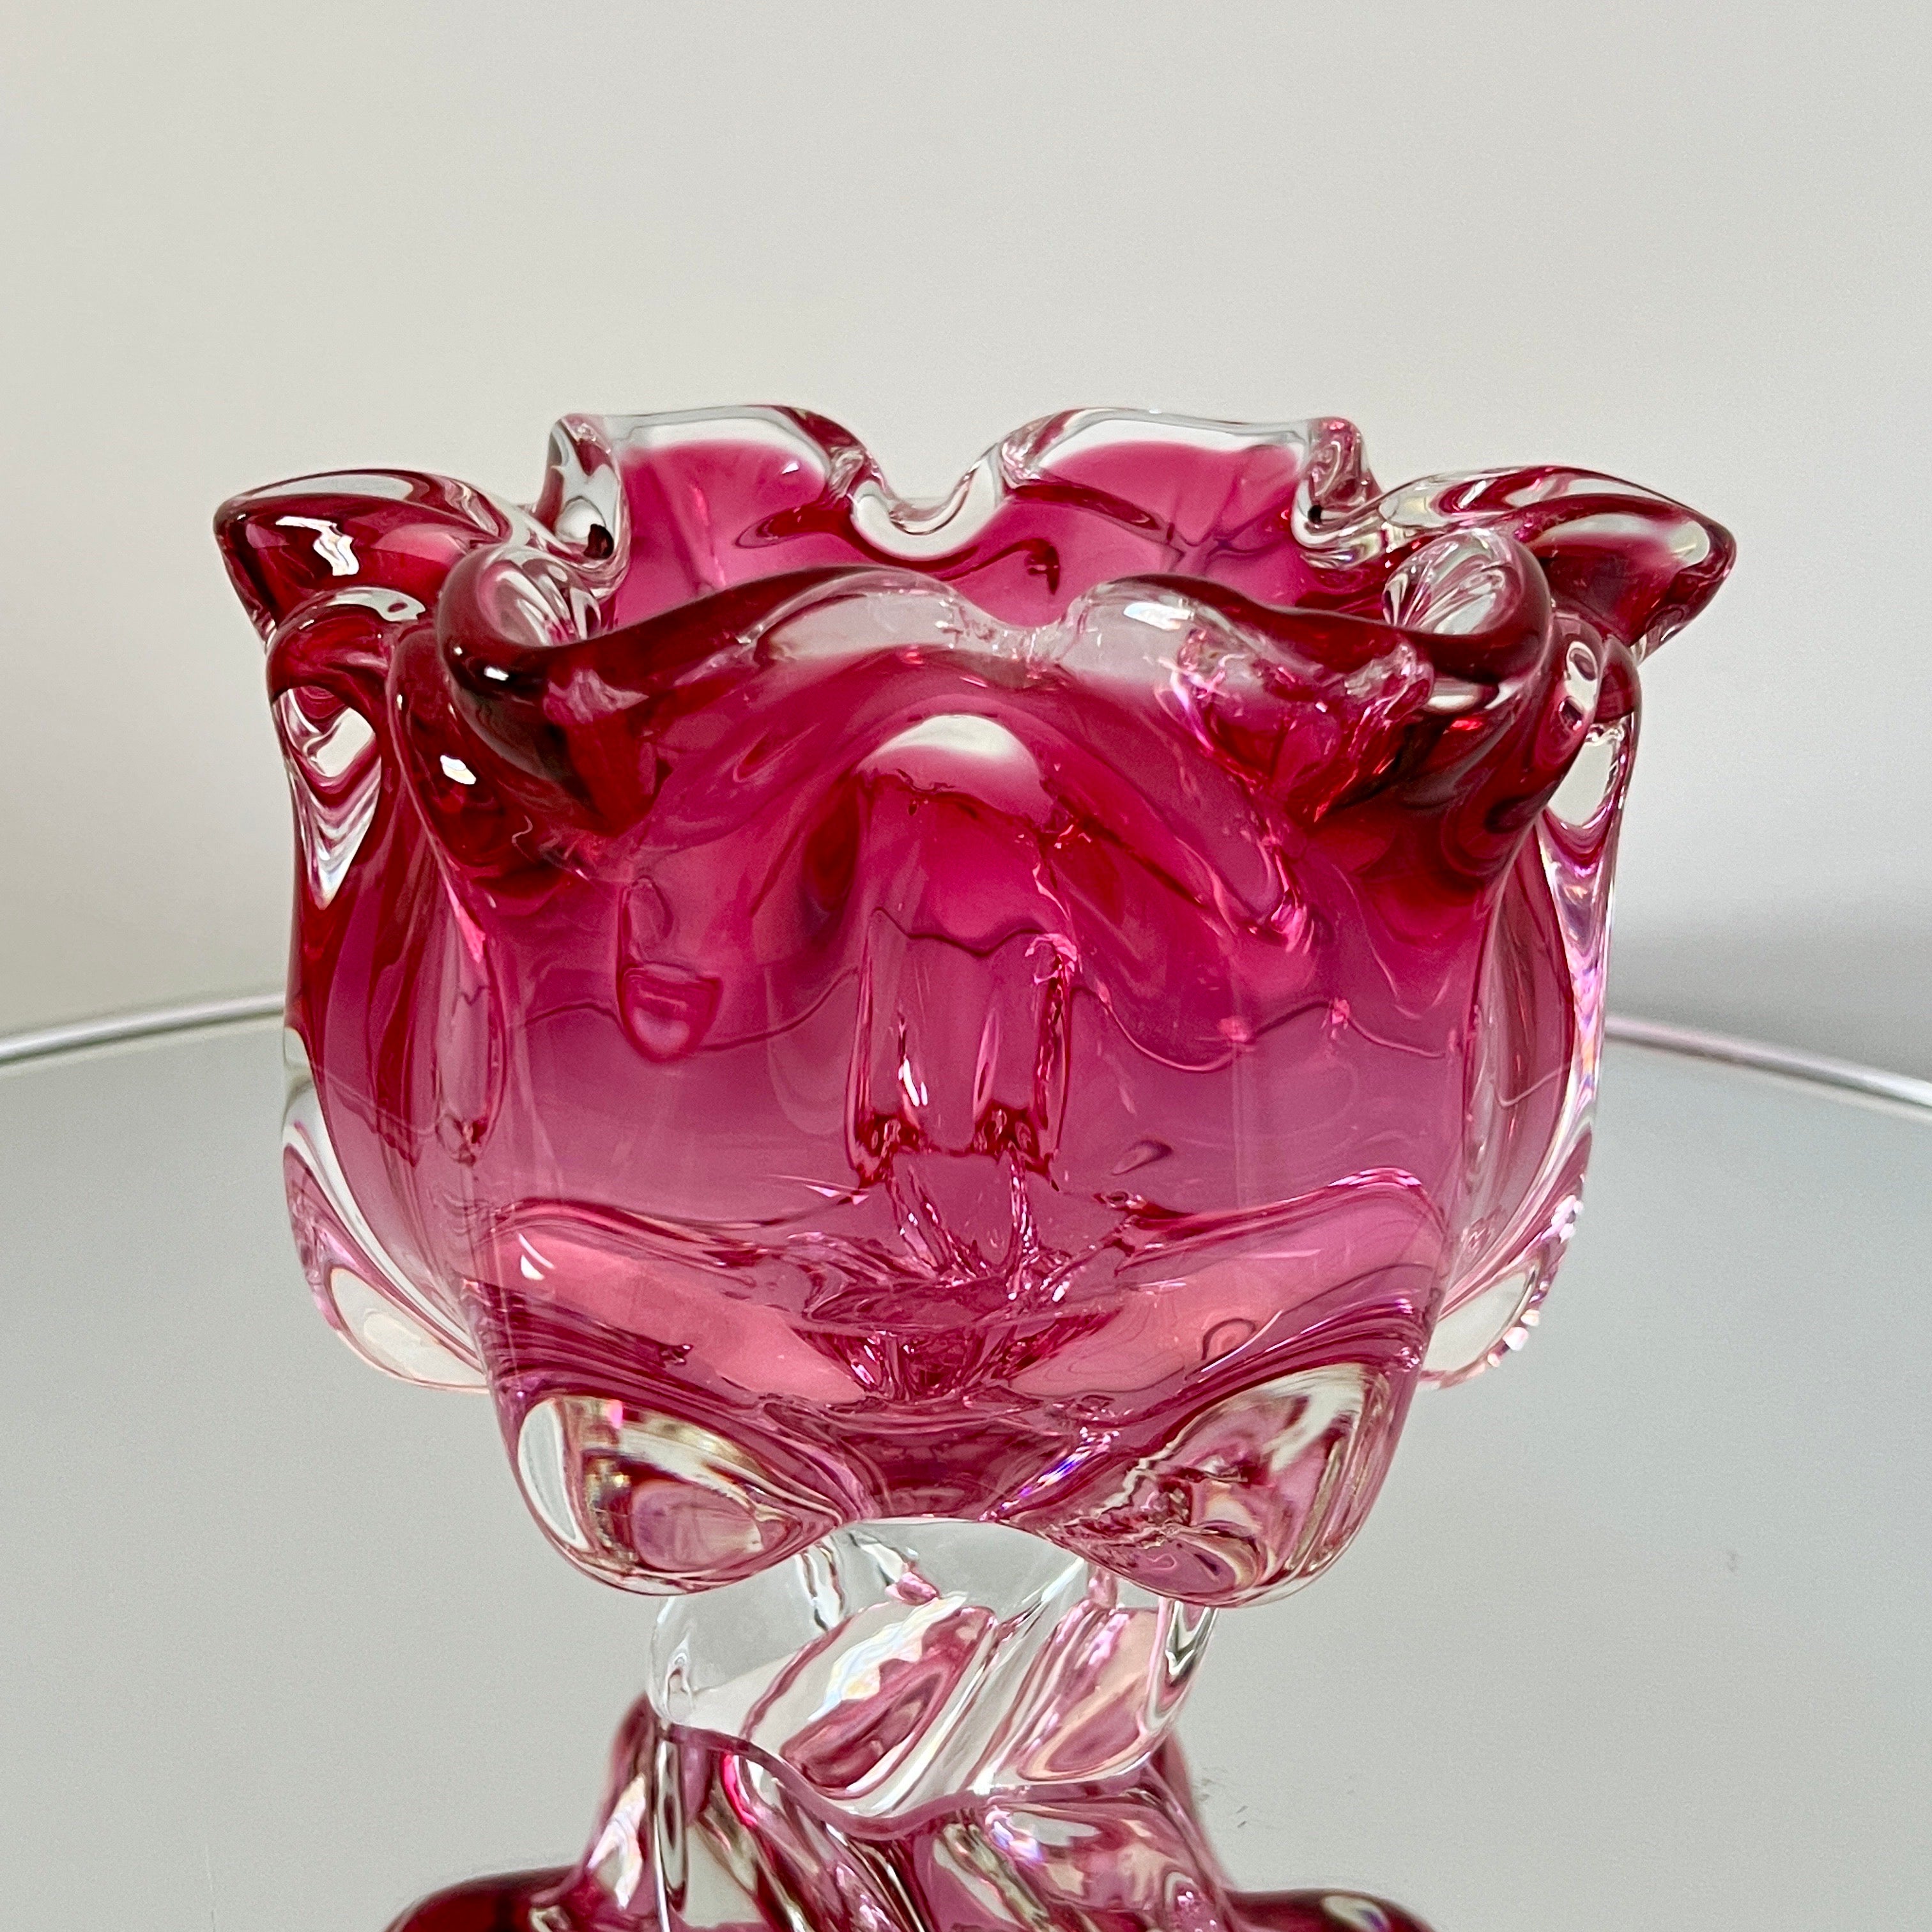 Mid-Century Modern Pink Murano Floral Vase with Footed Base by Fratelli Toso, c. 1950's For Sale